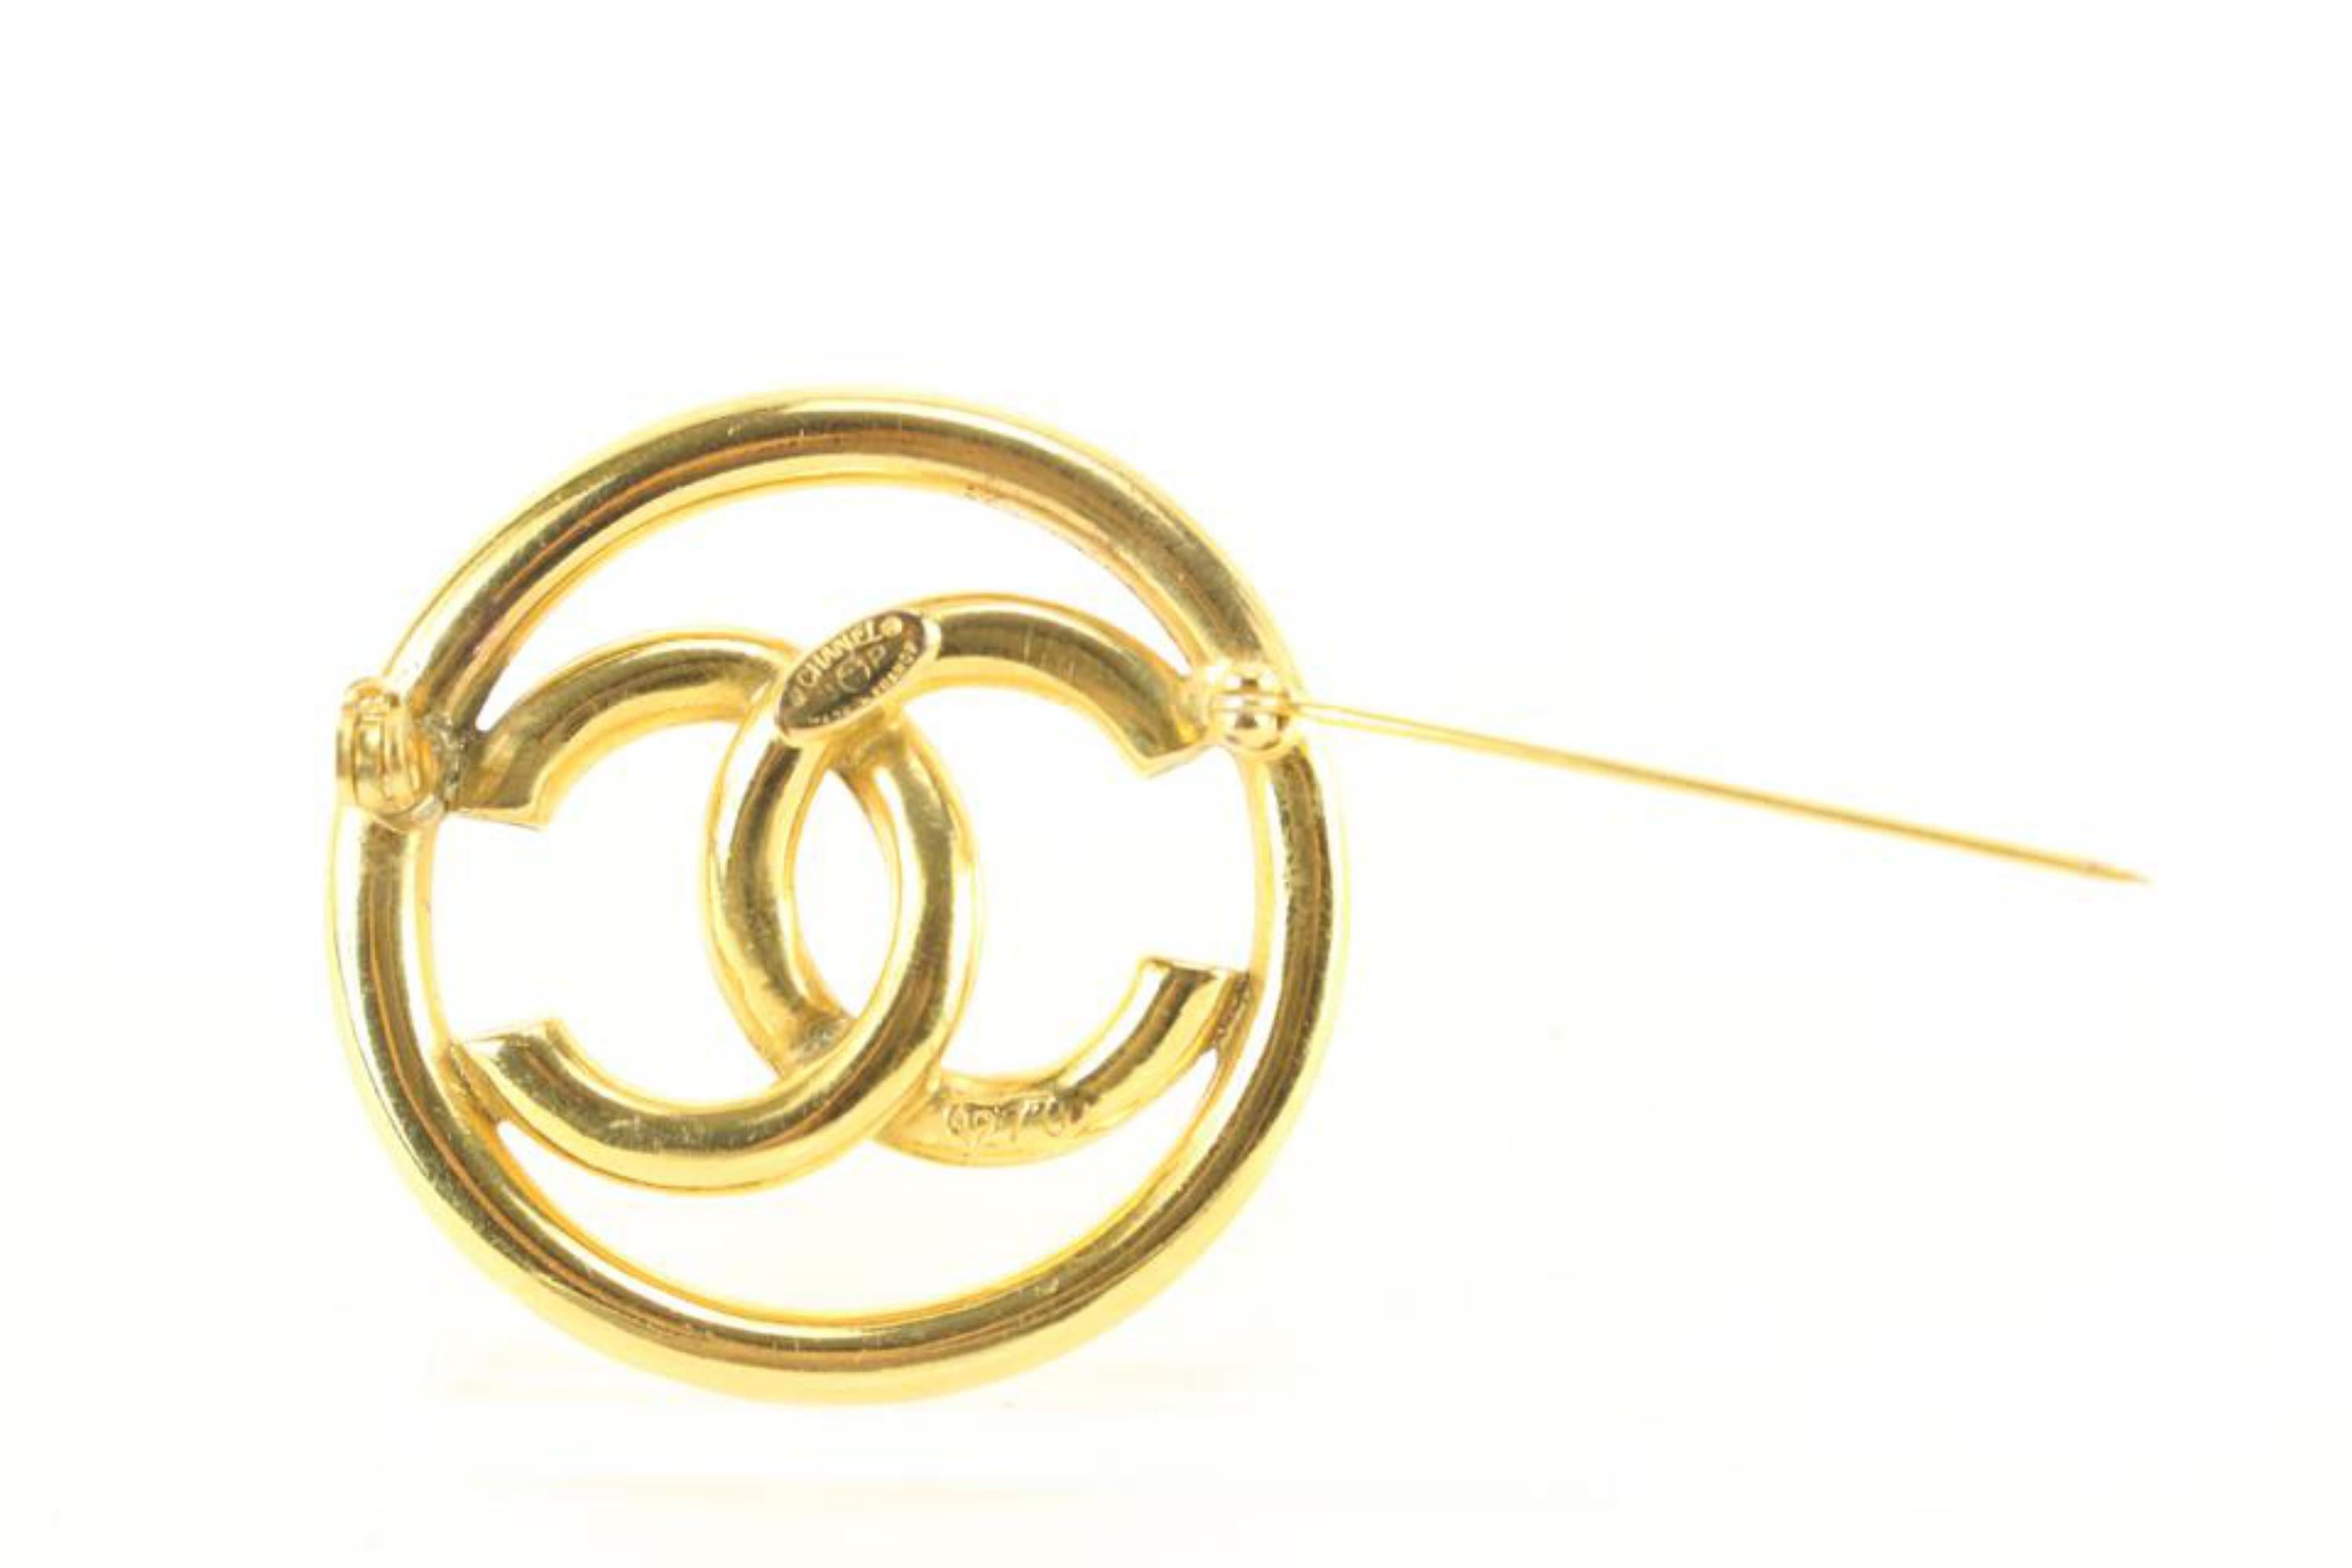 Chanel 93P 24k Gold Plate CC Logo Circle Brooch Pin 31ck824s For Sale 2